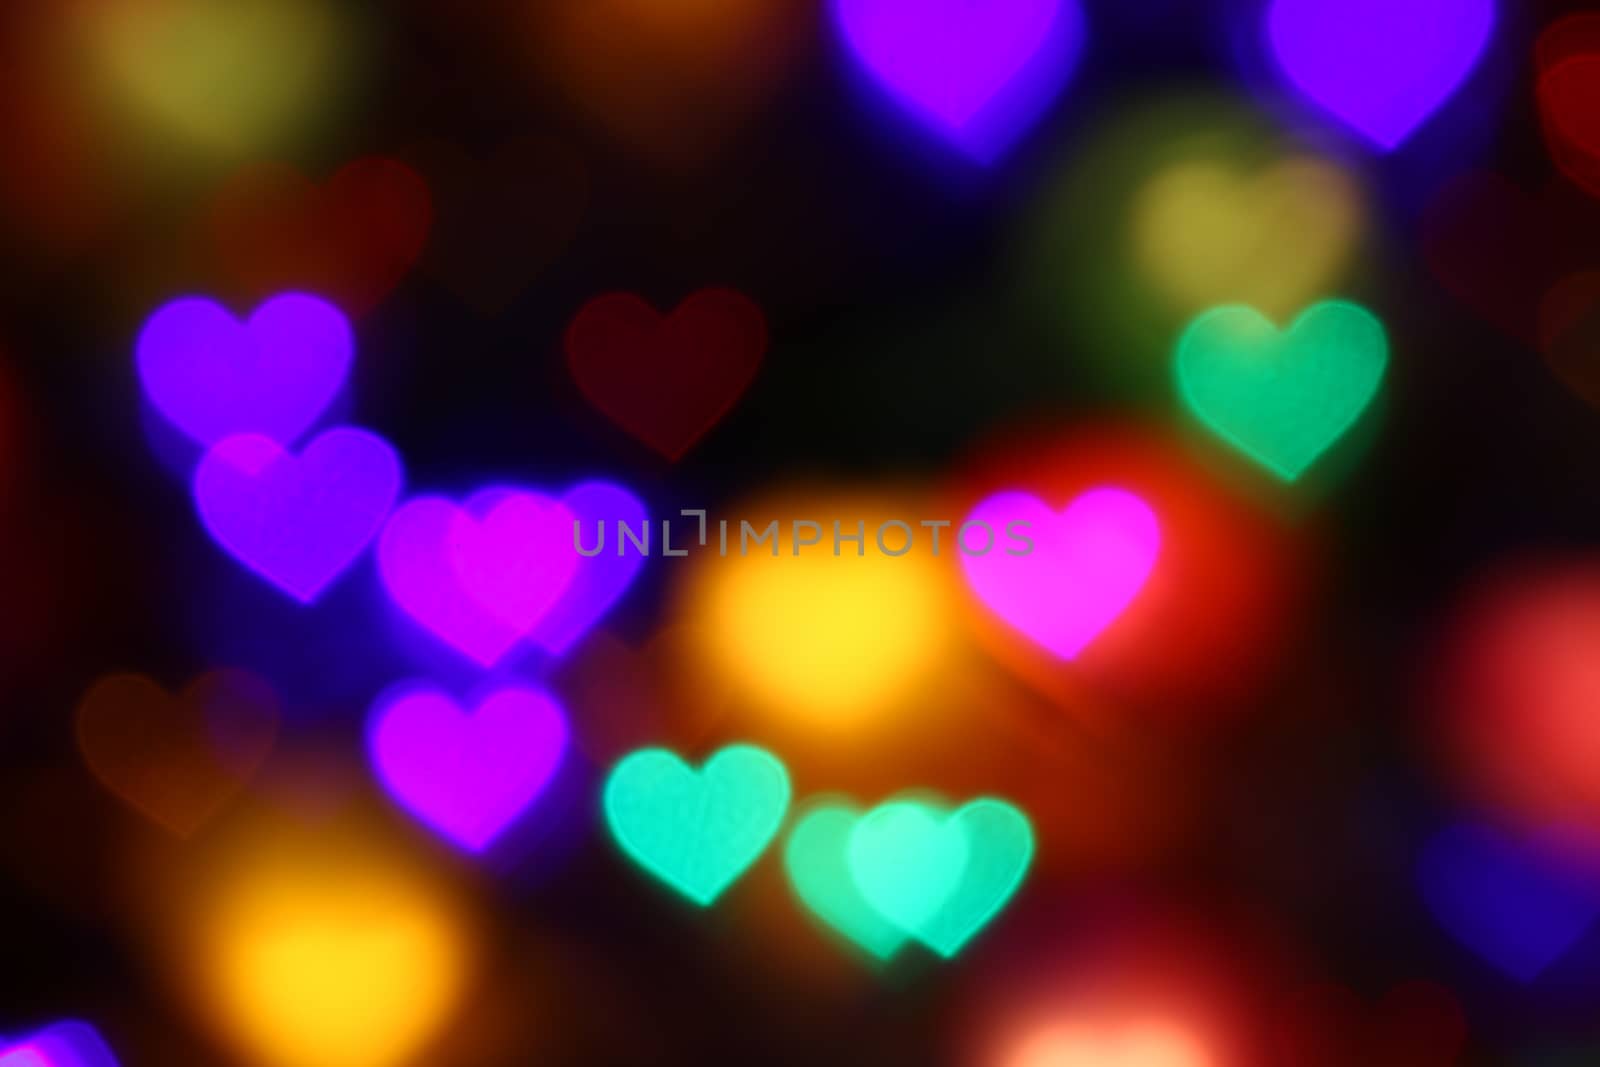 Valentines Colorful heart-shaped bokeh on black background lighting bokeh for decoration at night backdrop wallpaper blur valentine, Love Pictures background, Lighting heart shaped soft night abstract by cgdeaw